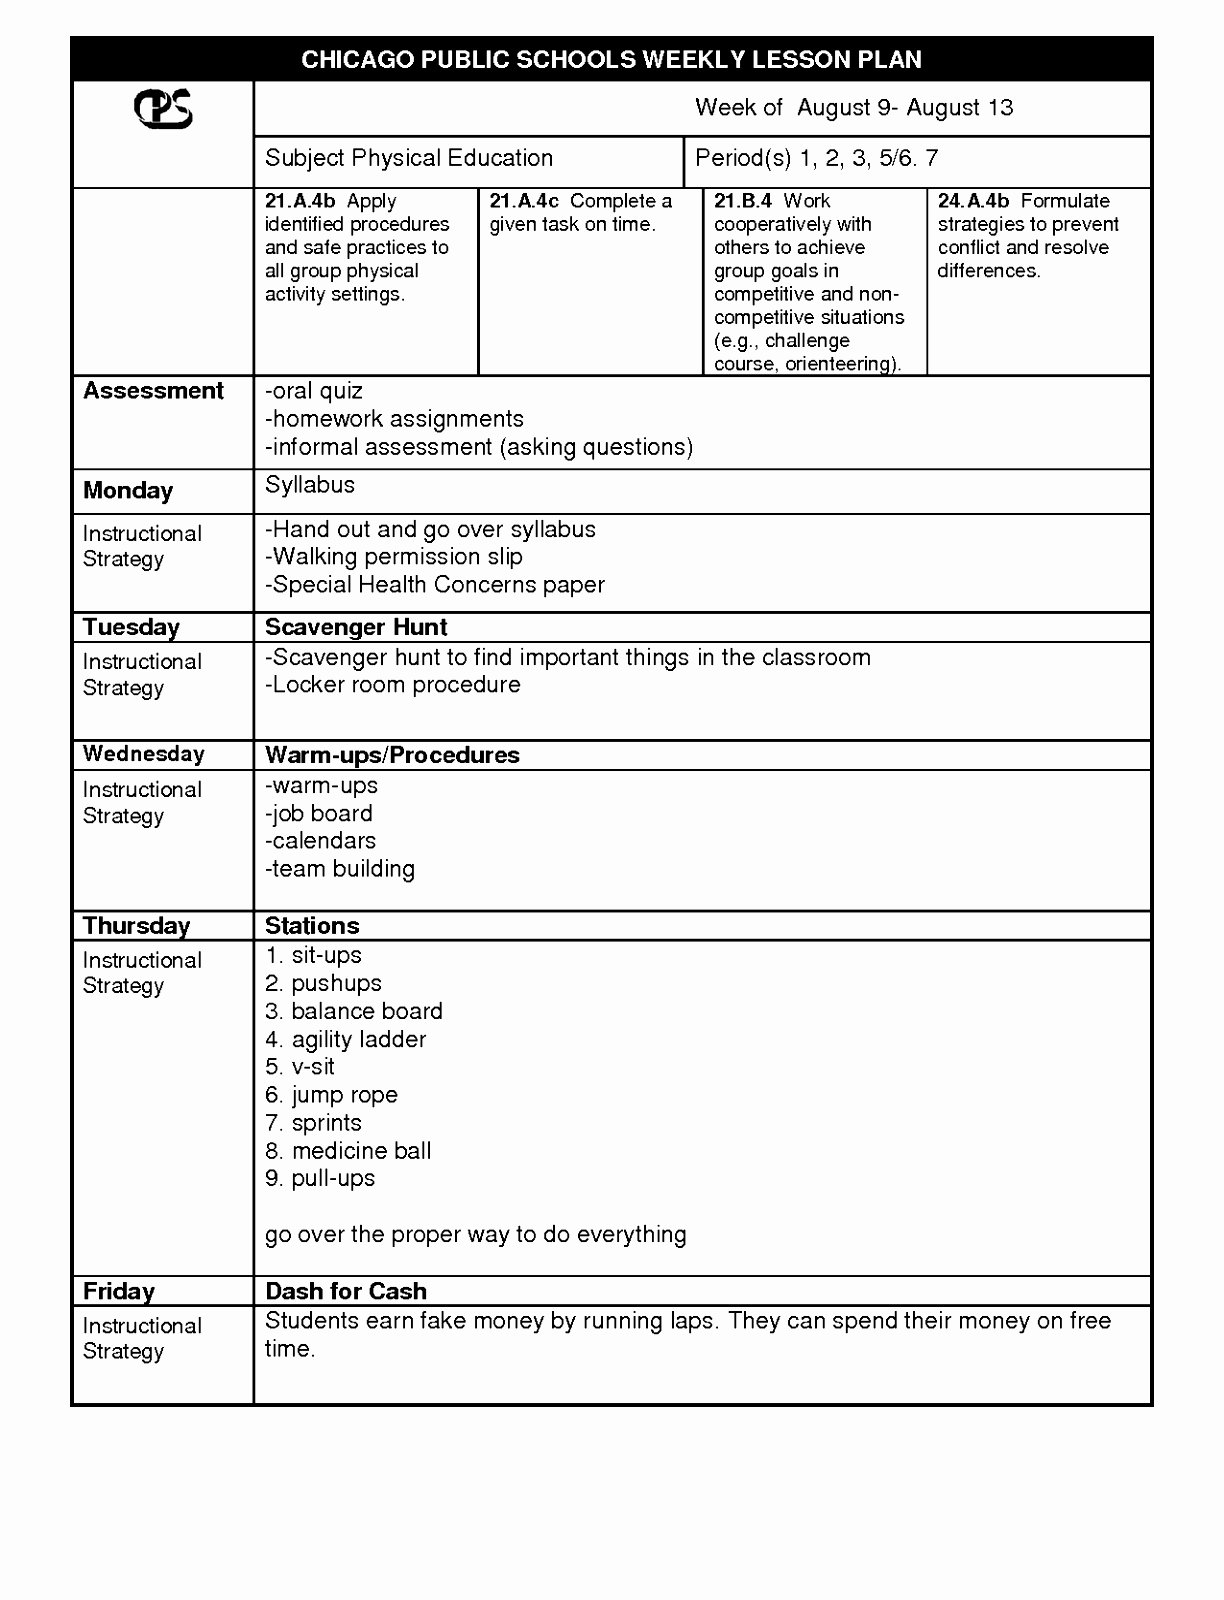 Best Lesson Plan Template New 10 Lesson Plan Template for Physical Education Eipot